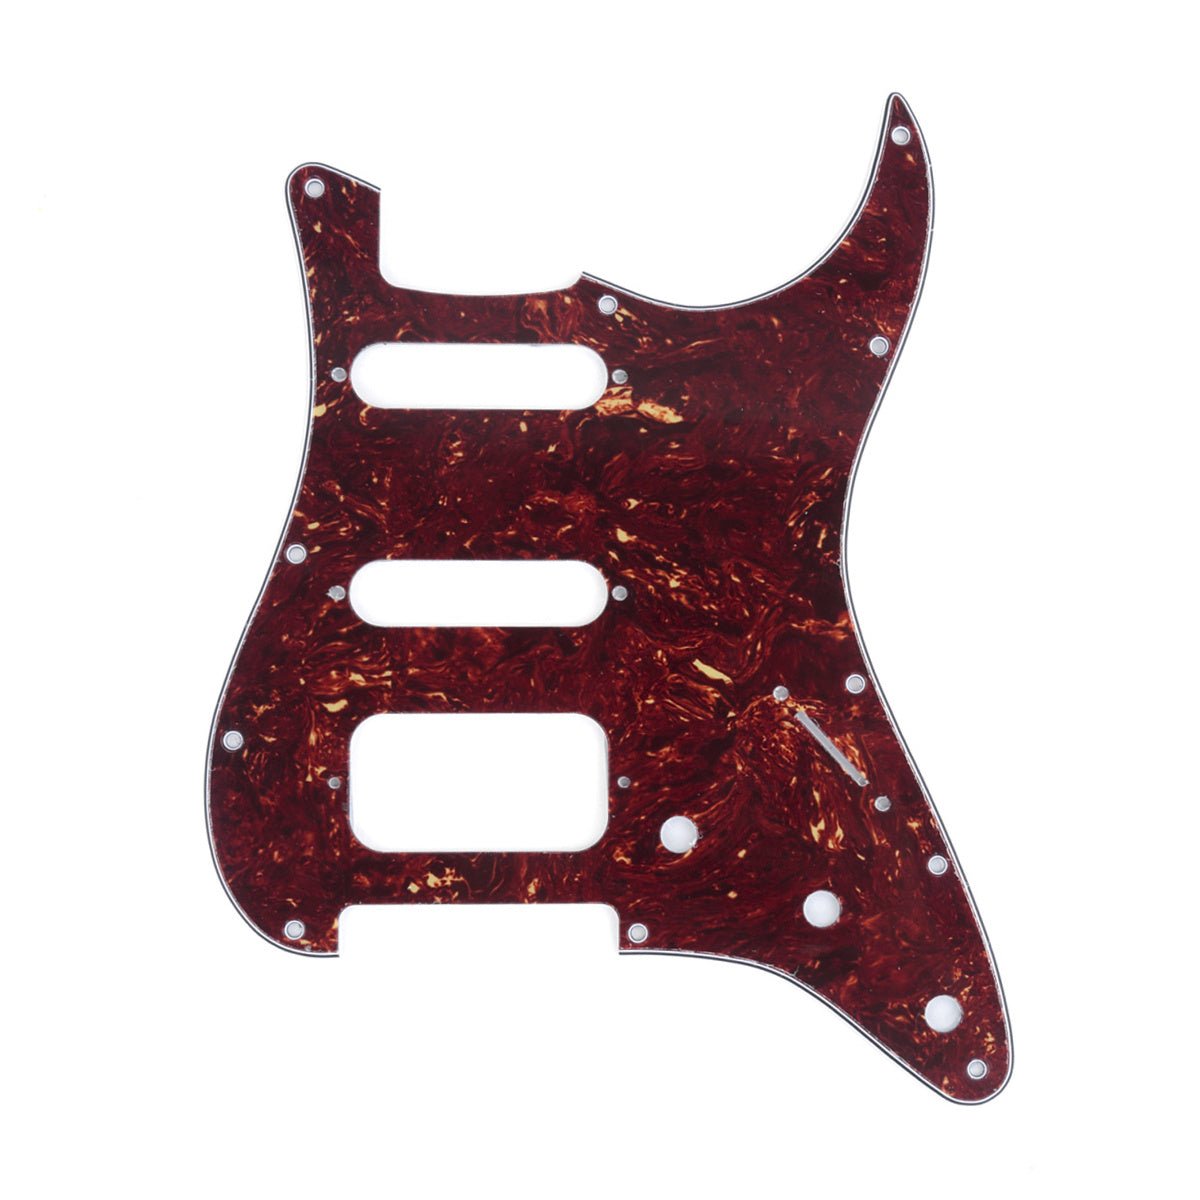 Musiclily Pro 11-Hole Round Corner HSS Guitar Strat Pickguard for USA/Mexican Stratocaster Open Pickup, 4Ply Vintage Tortoise